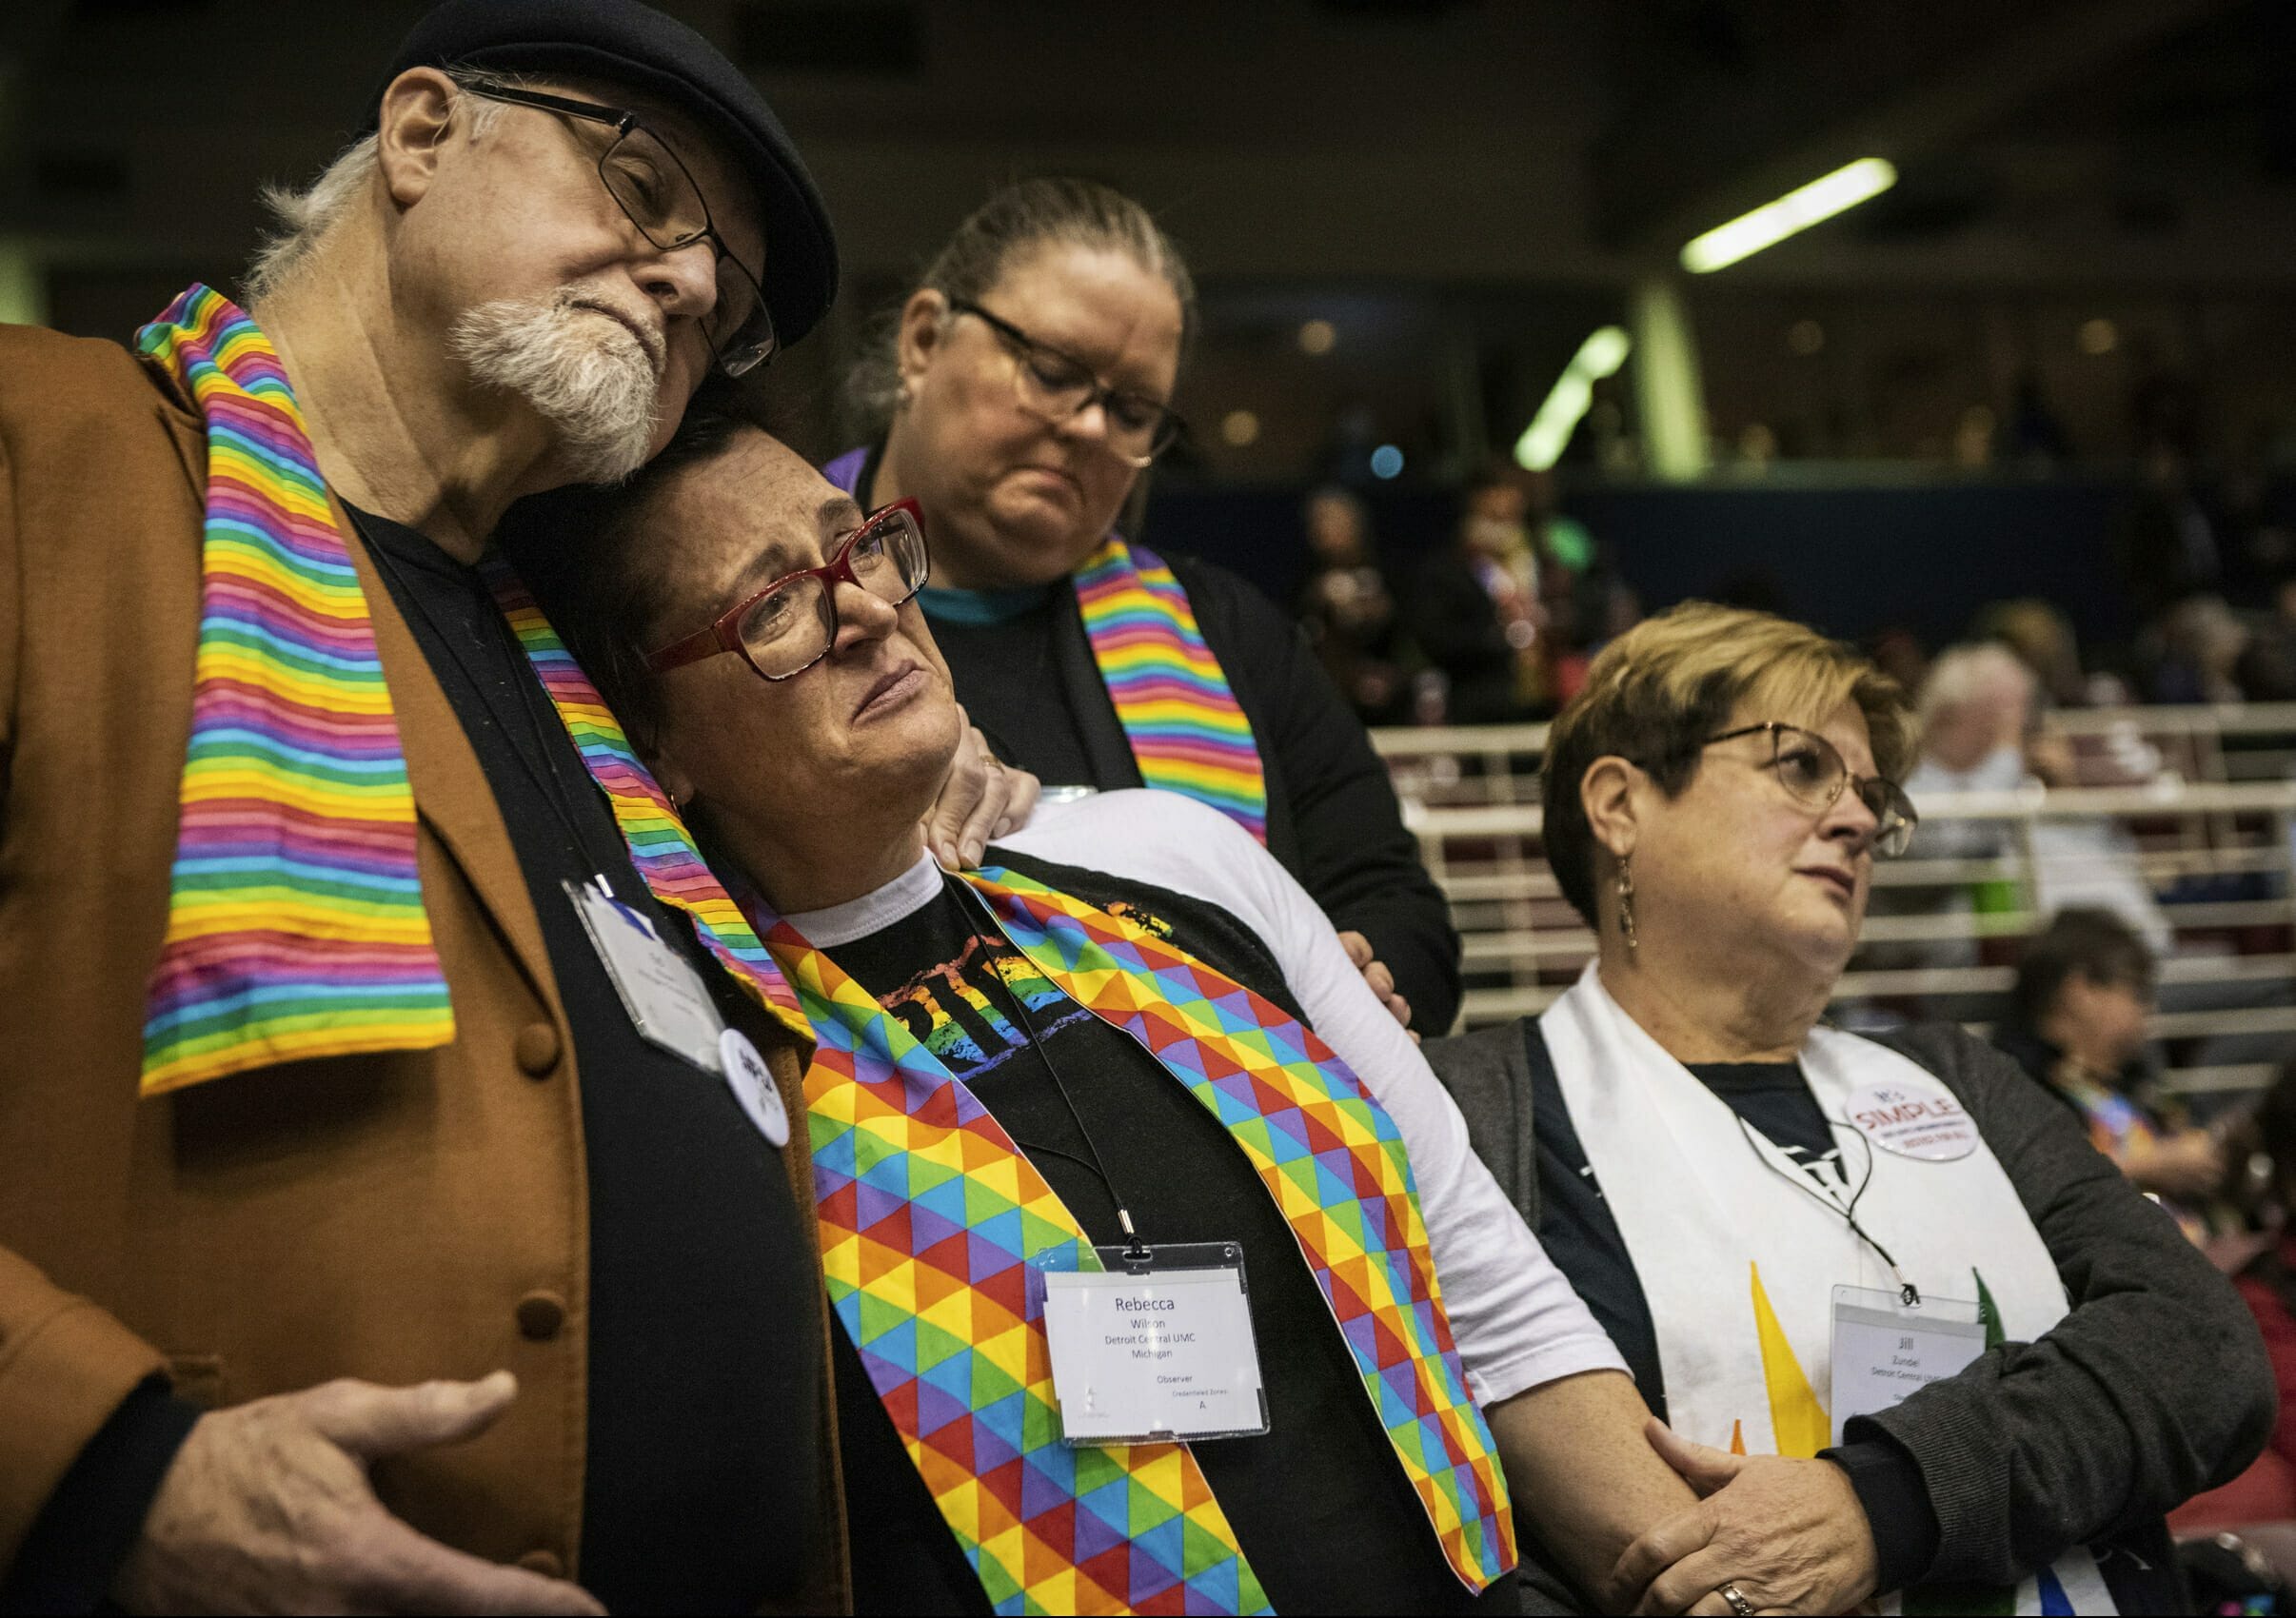 From left, Ed Rowe, Rebecca Wilson, Robin Hager and Jill Zundel, react to the defeat of a proposal that would allow LGBT clergy and same-sex marriage within the United Methodist Church at the denomination’s 2019 Special Session of the General Conference in St. Louis on Tuesday.